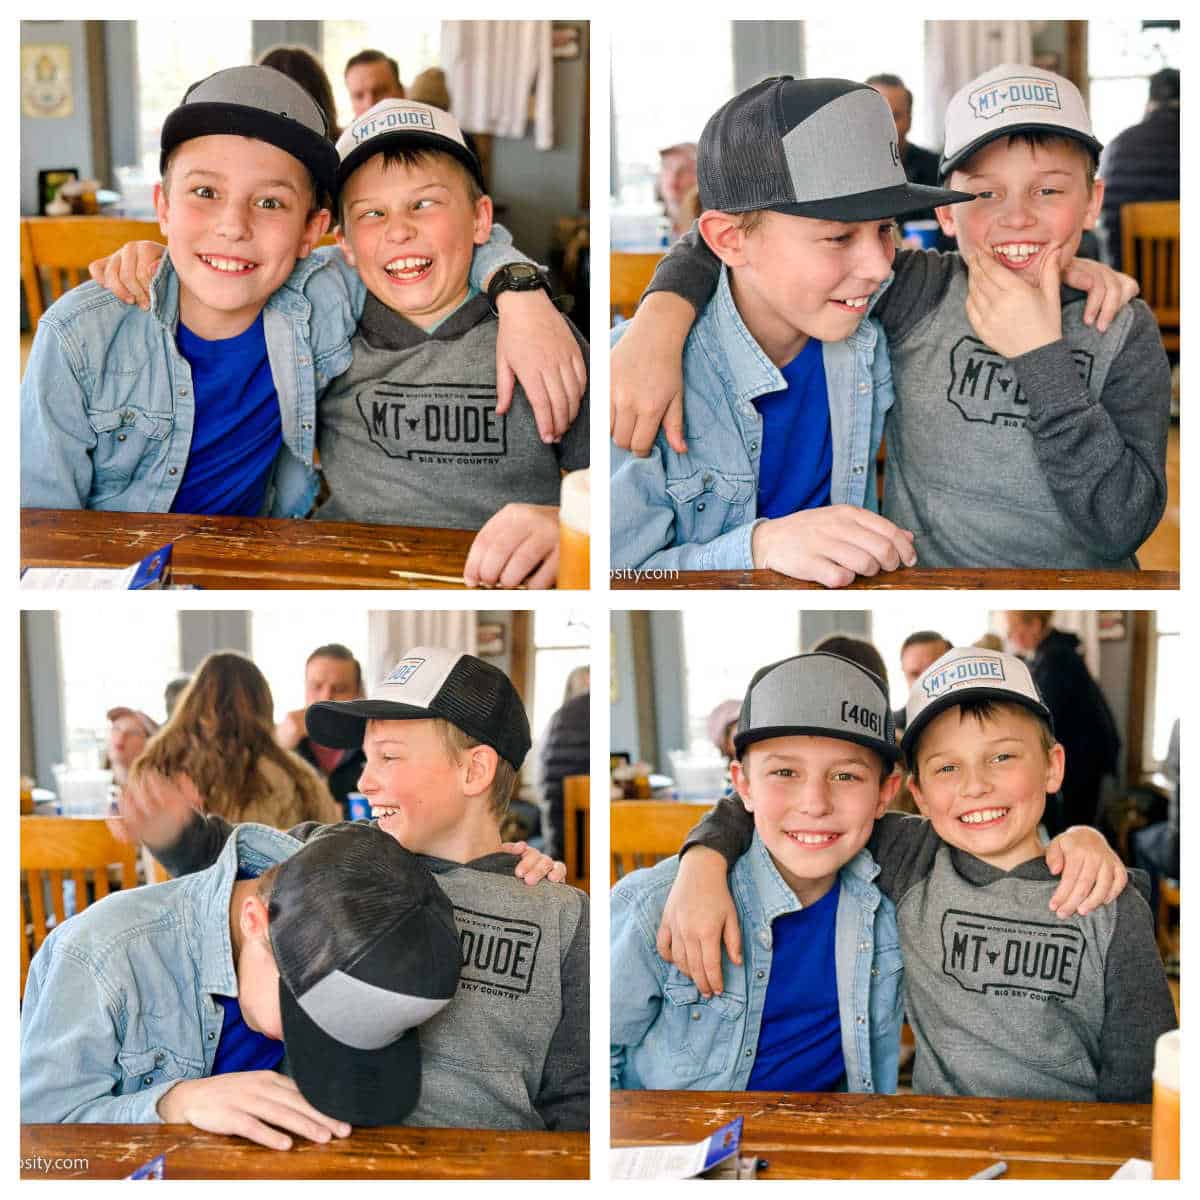 Boys smiling at the camera, laughing, in a 4 image collage.